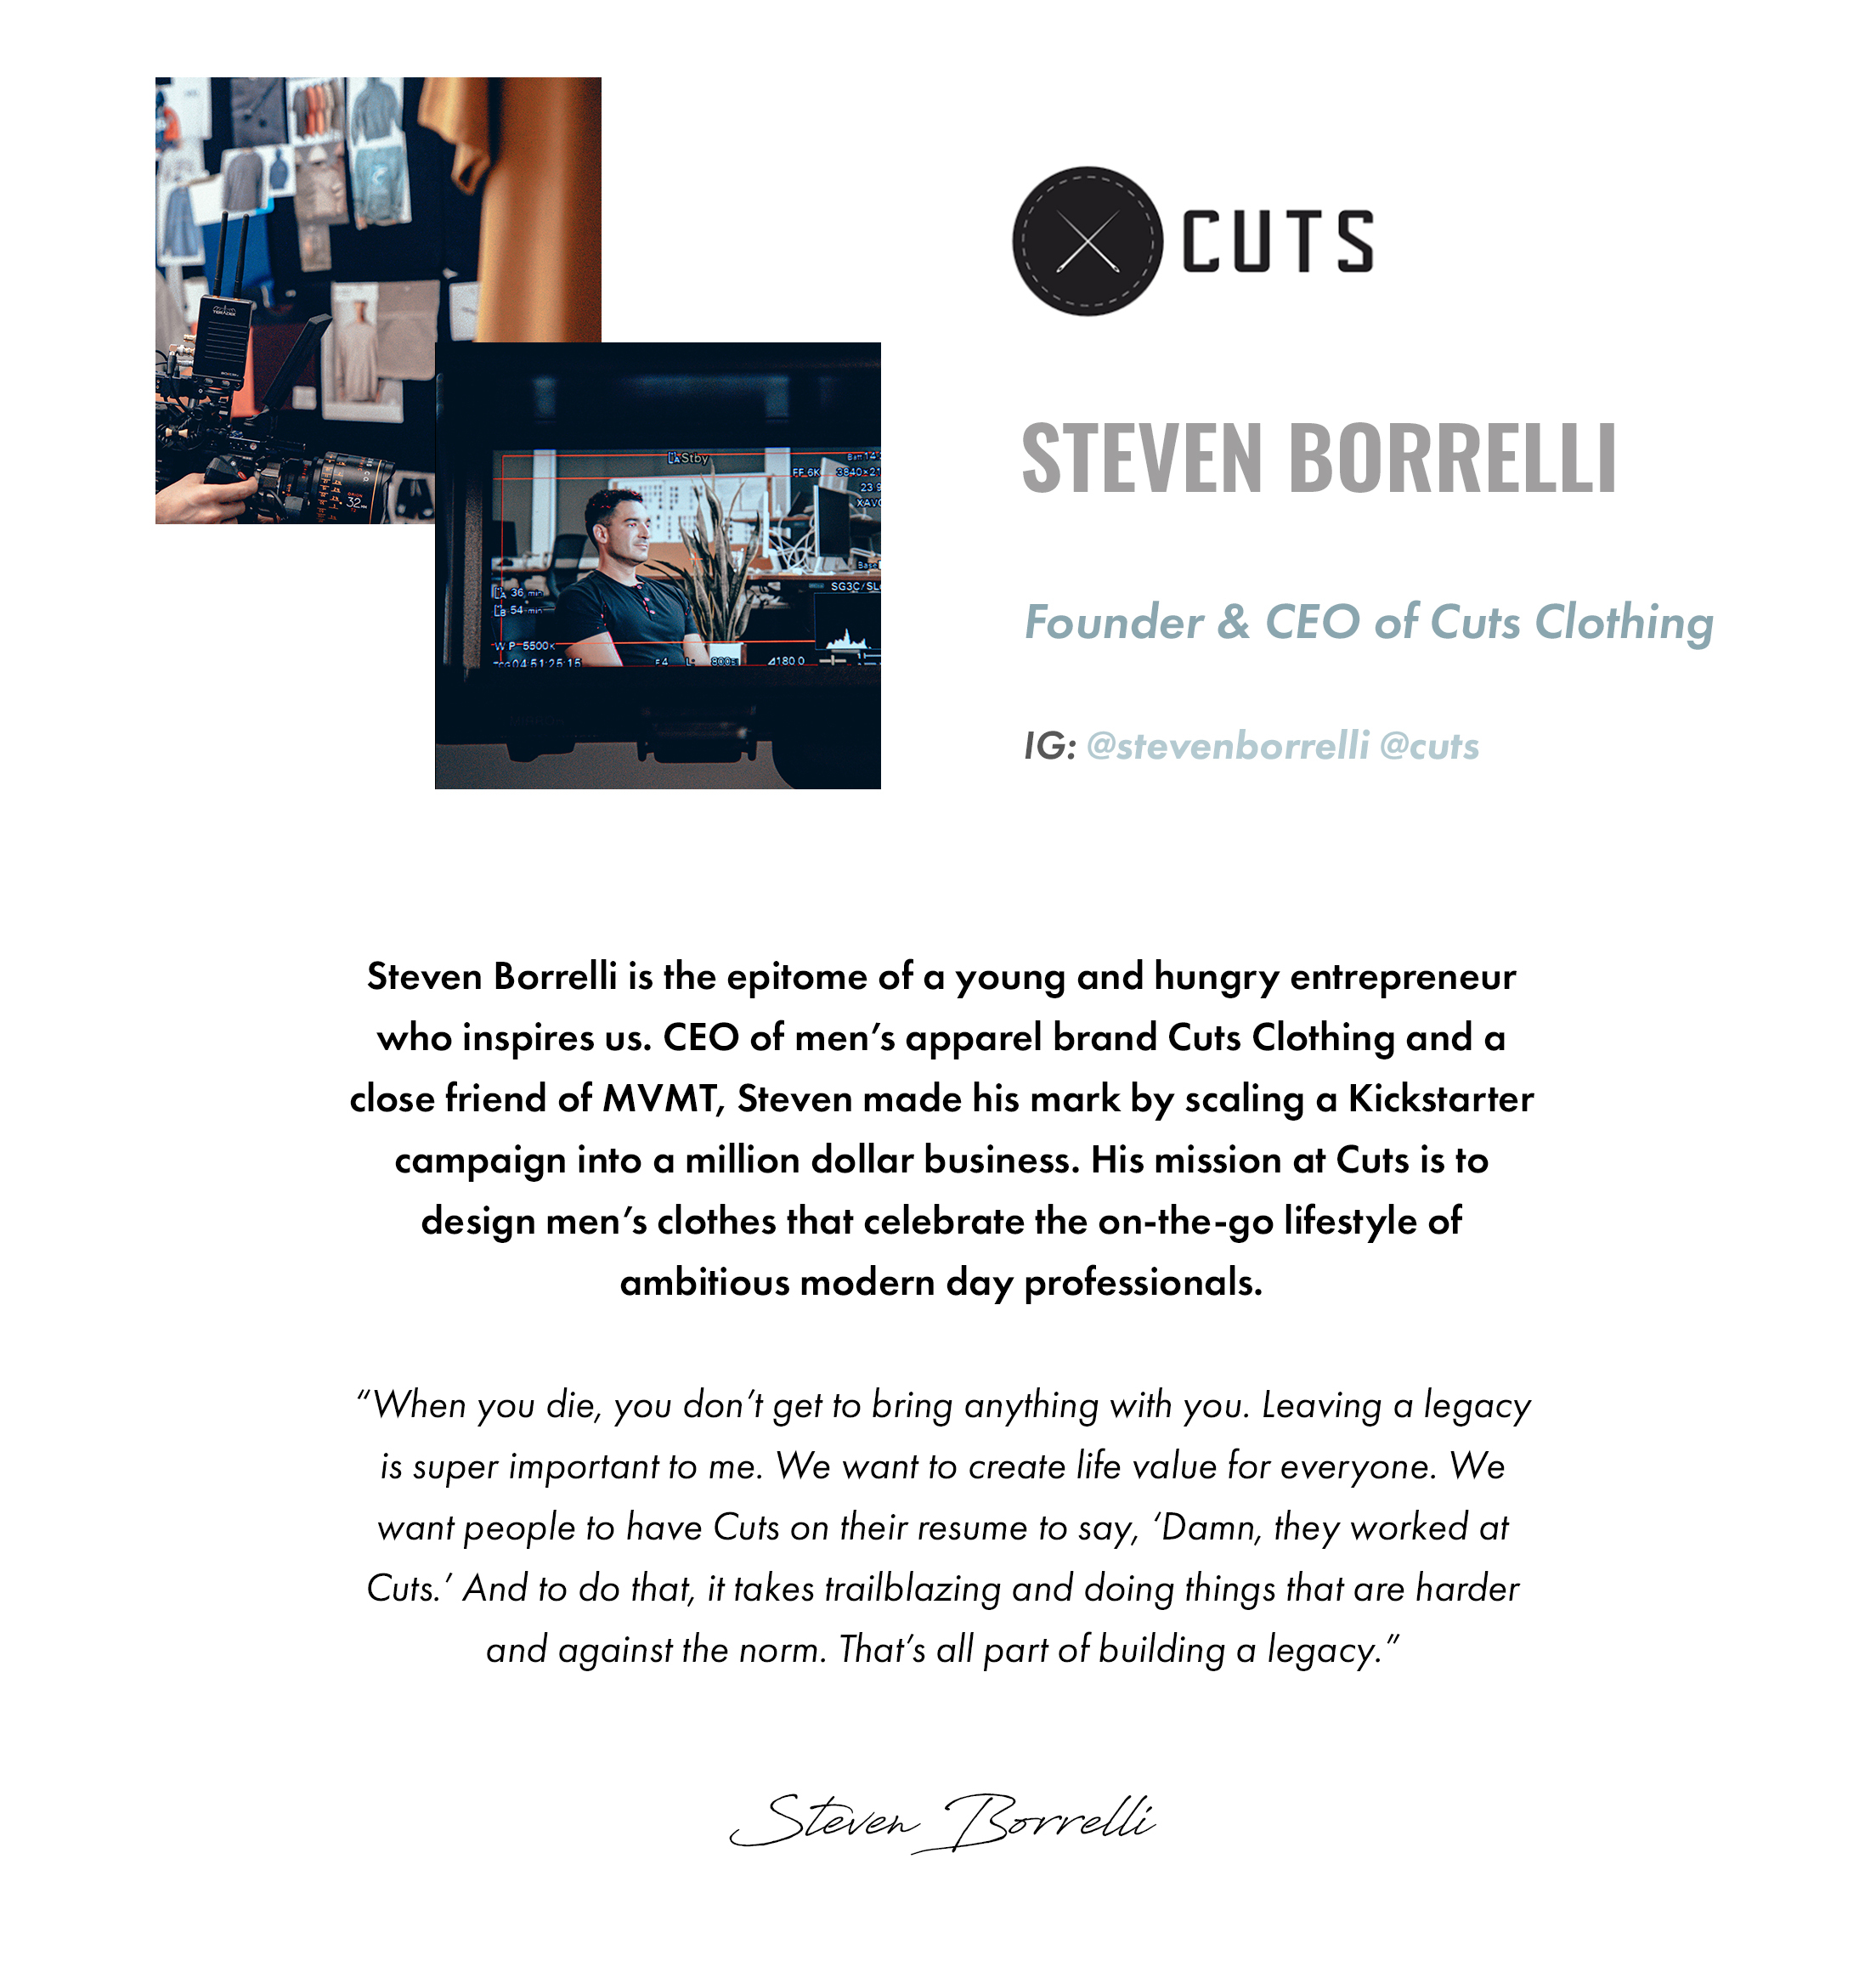 Cuts. Steven Borrelli. Founder & CEO of Cuts Clothing. IG: @stevenborrelli @cuts. Steven Borrelli is the epitome of a young and hungry entrepreneur who inspires us. CEO of men's apparel brand Cuts Clothing and a close friend of MVMT, Steven made his mark by scaling a Kickstarter campaign into a million dollar business. His mission at Cuts is to design men's clothes that celebrate the on-the-go lifestyle of ambitious modern day professionals. "When you die, you don't get to bring anything with you. Leaving a legacy is super important to me. We want to create life value for everyone. We want people to have Cuts on their resume to say, 'Damn, they worked at Cuts.' And to do that, it takes trailblazing and doing things that are harder and against the norm. That's all part of building a legacy." -Steven Borrelli